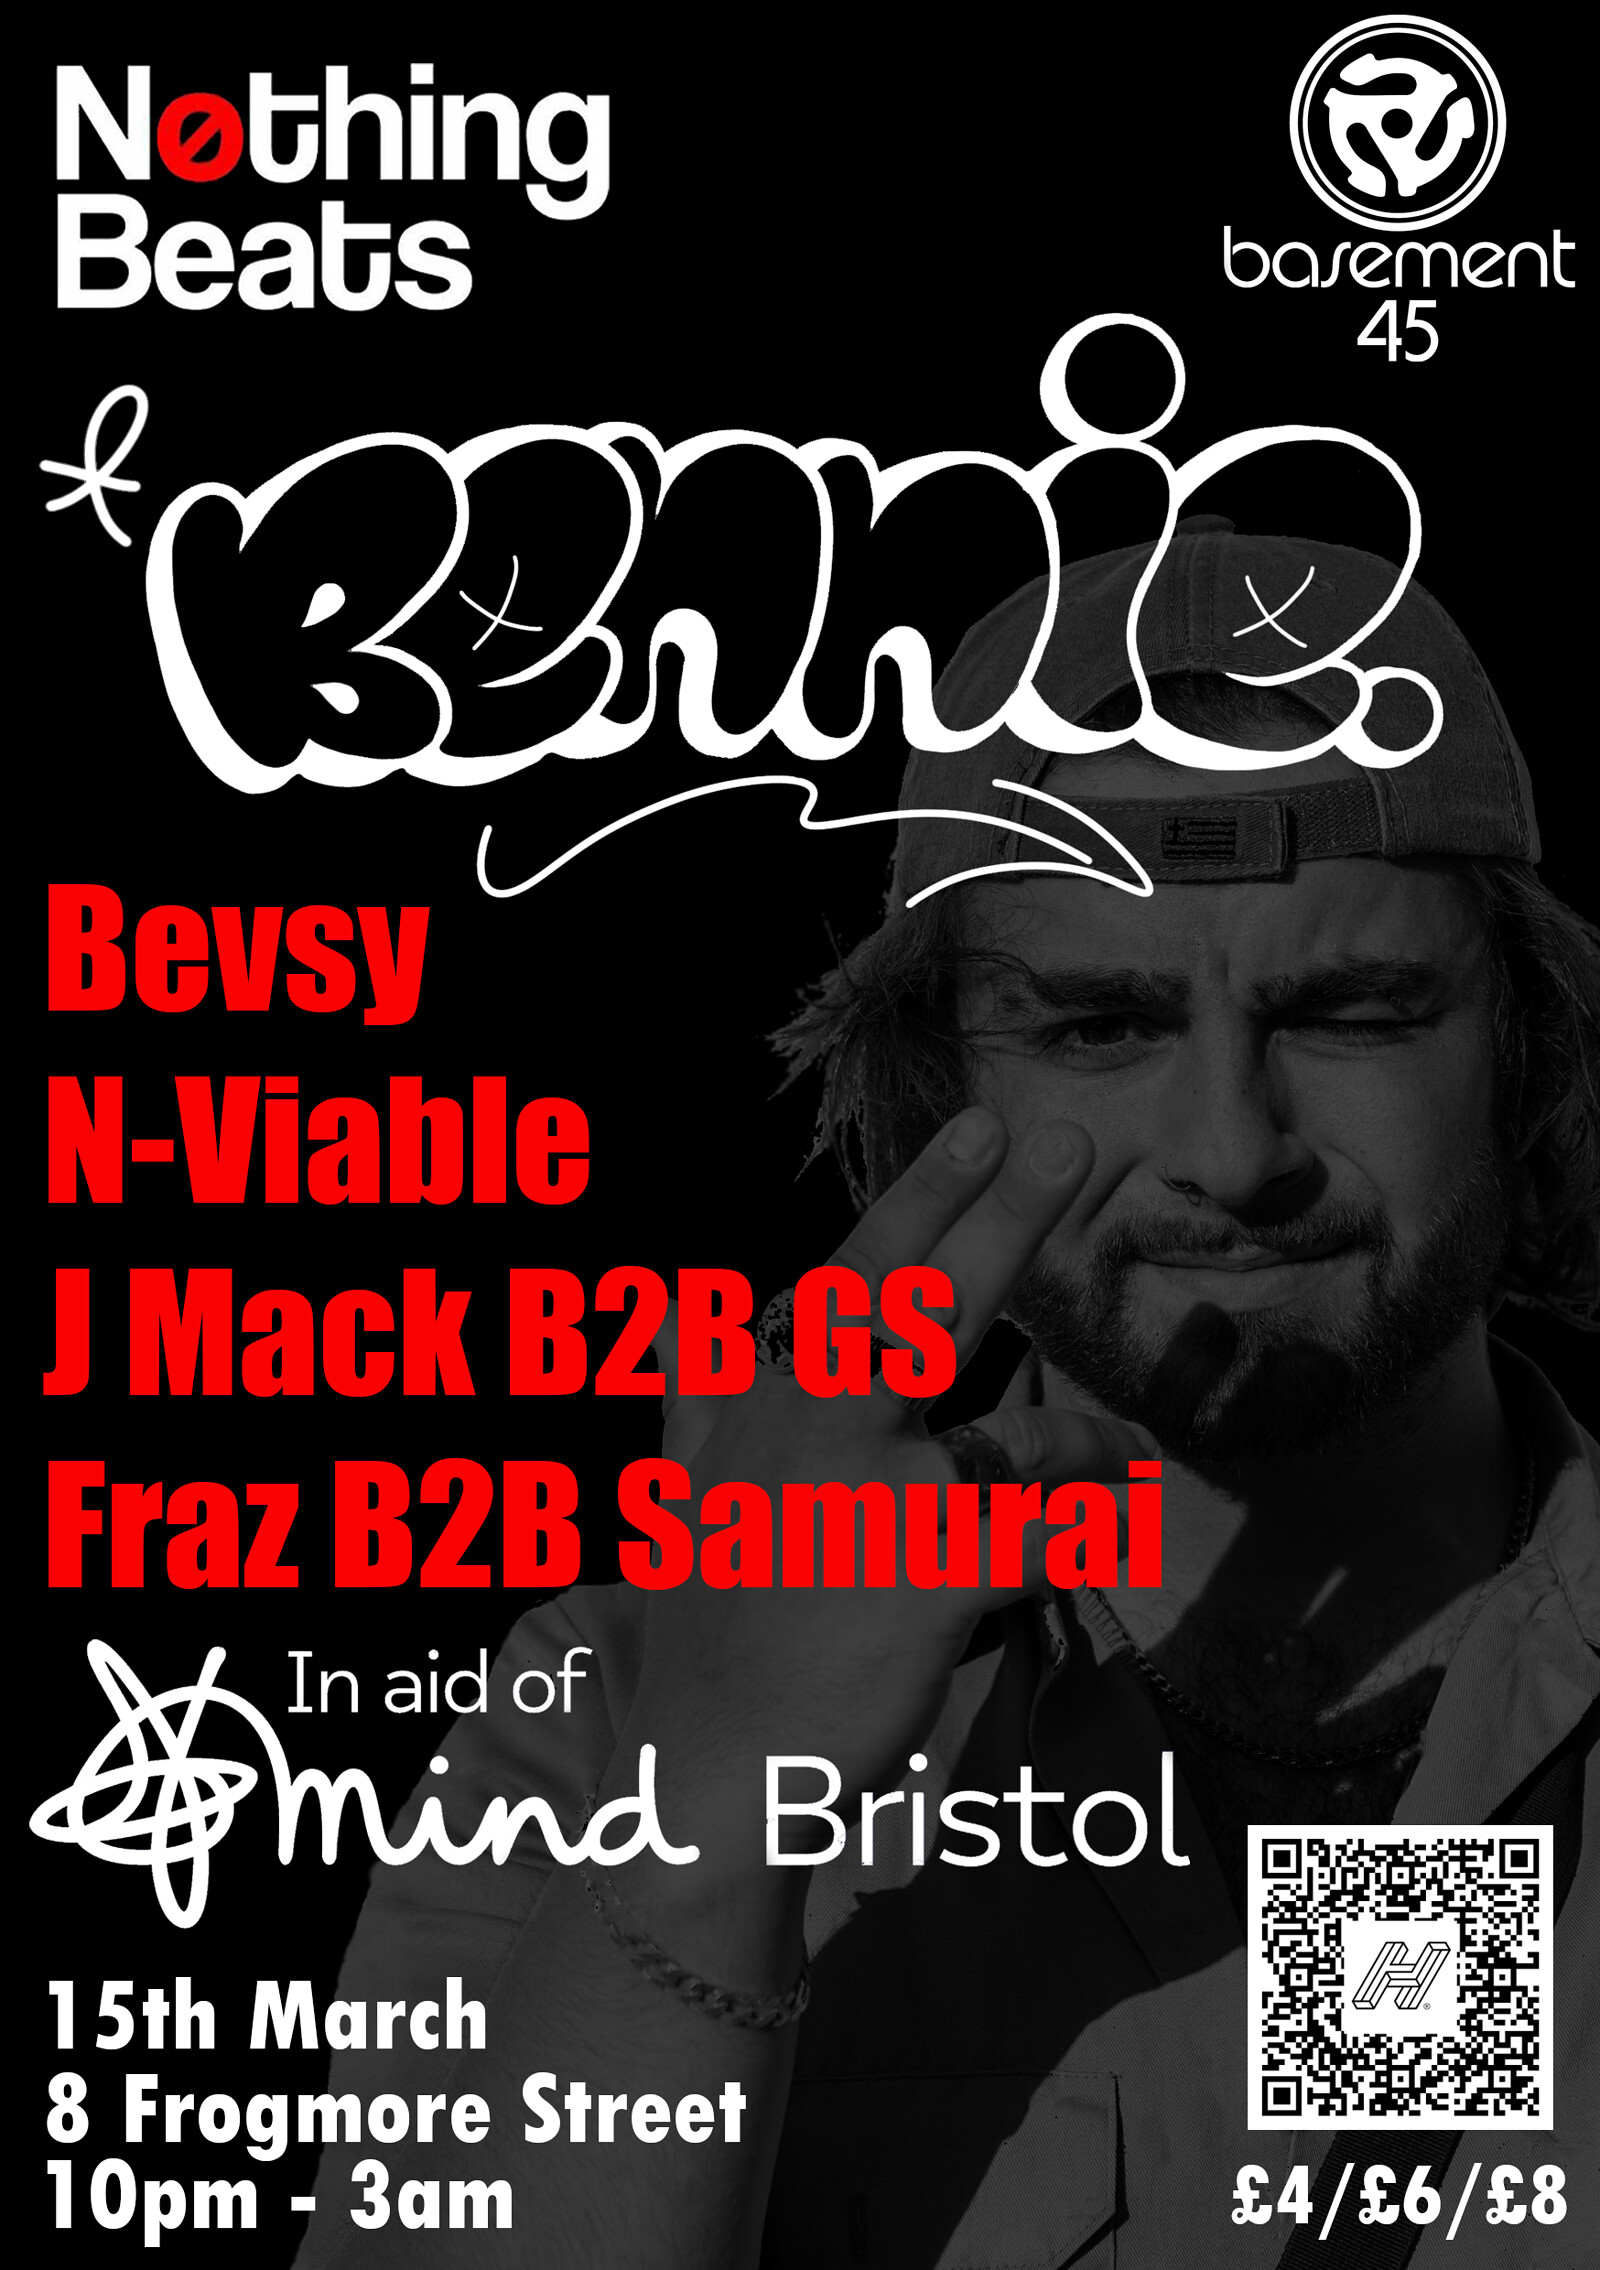 Nothing Beats: Charity Fundraiser feat. Bennie at Basement 45